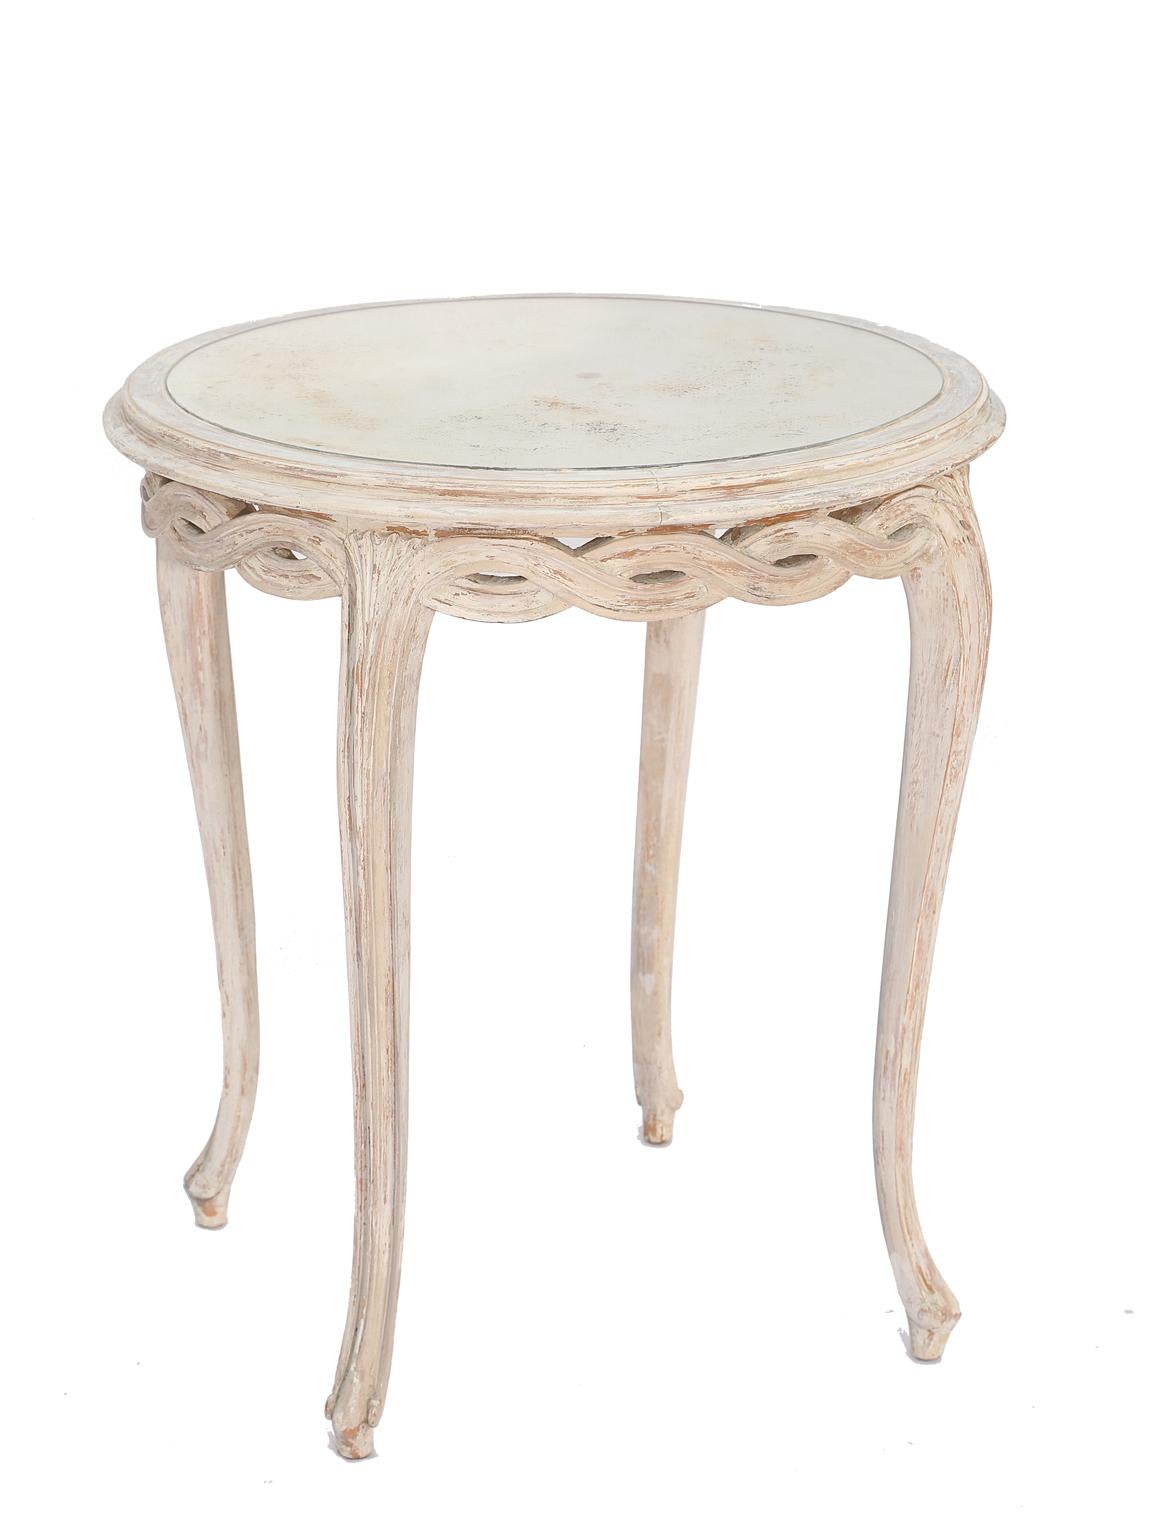 Pair of end tables, each having a round top of spotted mirrorplate, having a painted table base showing natural wear, its pierced apron carved into braided evolute scroll, raised on cabriole legs. 

Stock ID: D9266.